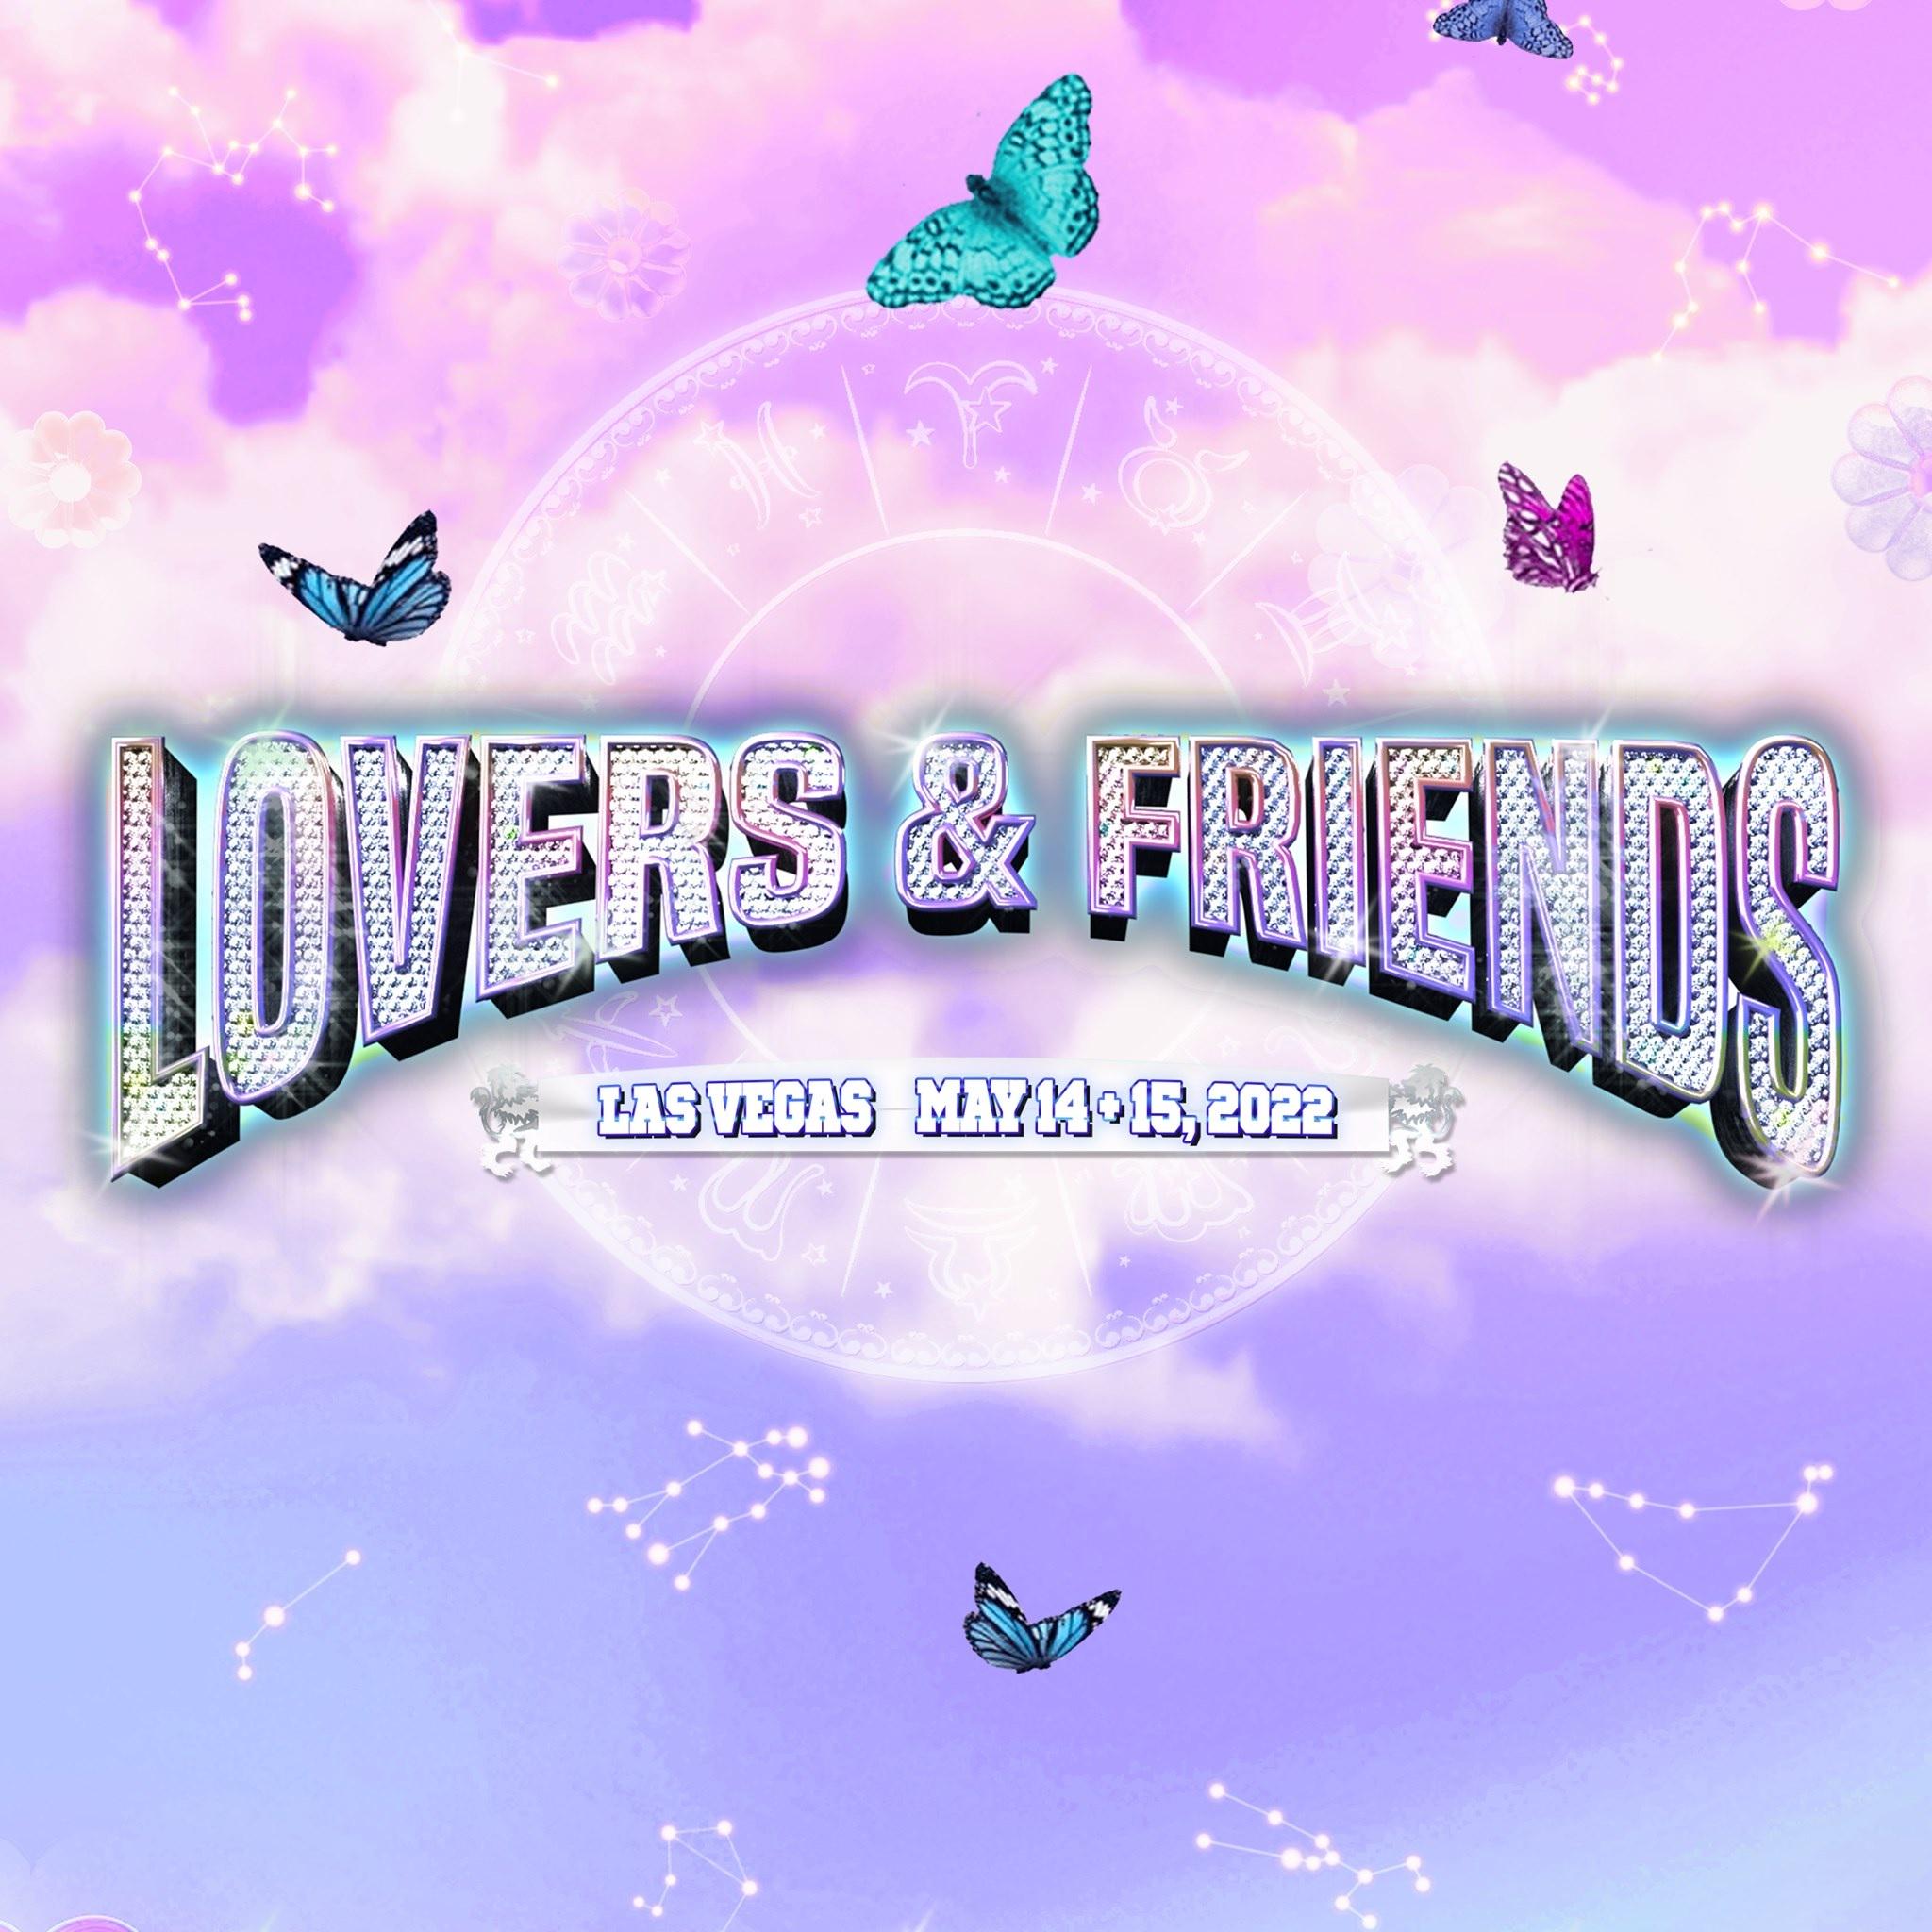 Lovers and Friends Festival